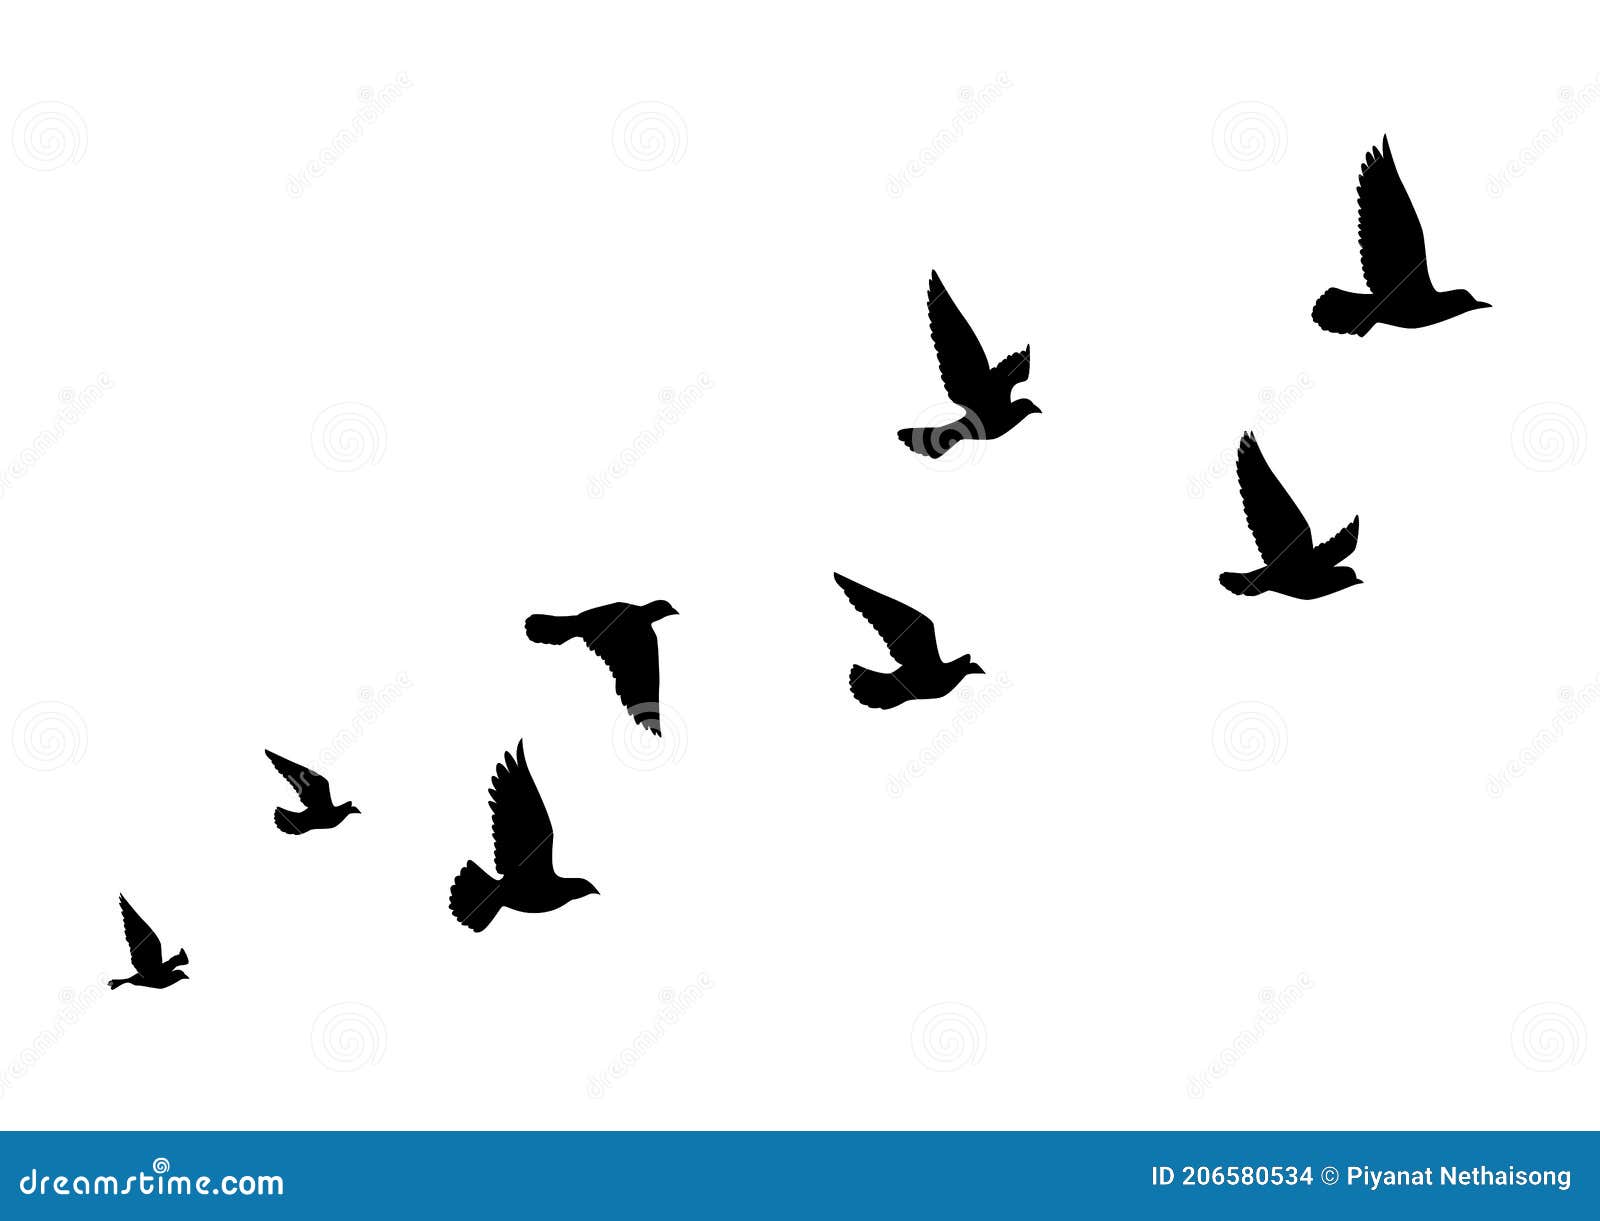 Flying Birds Silhouettes on White Background. Vector Illustration. Isolated  Bird Flying Stock Vector - Illustration of dove, drawing: 206580534